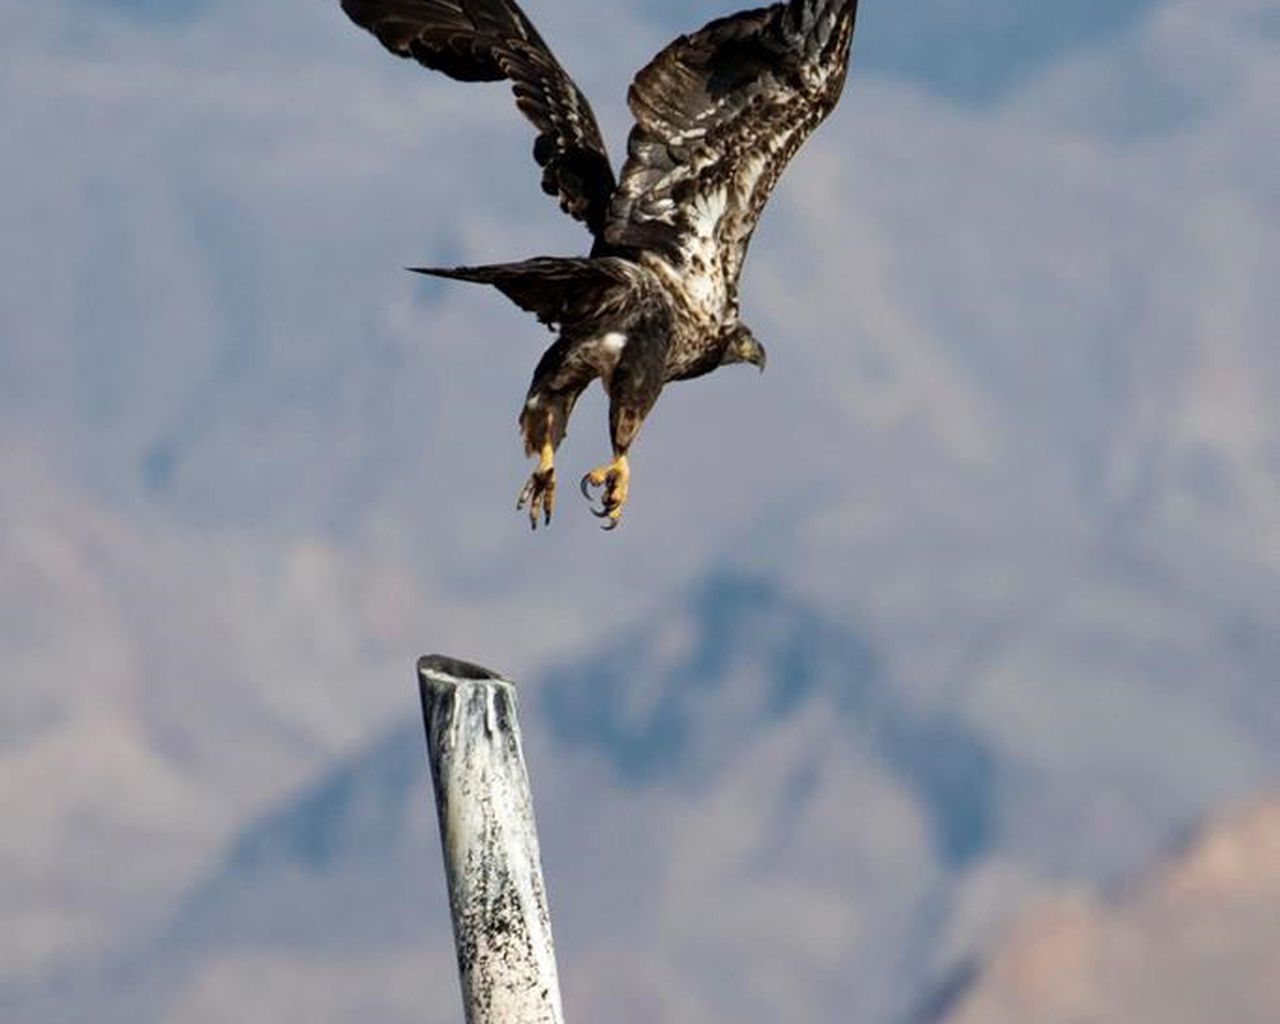 Yearly survey tallies 123 eagles in lakes Mead, Mohave area